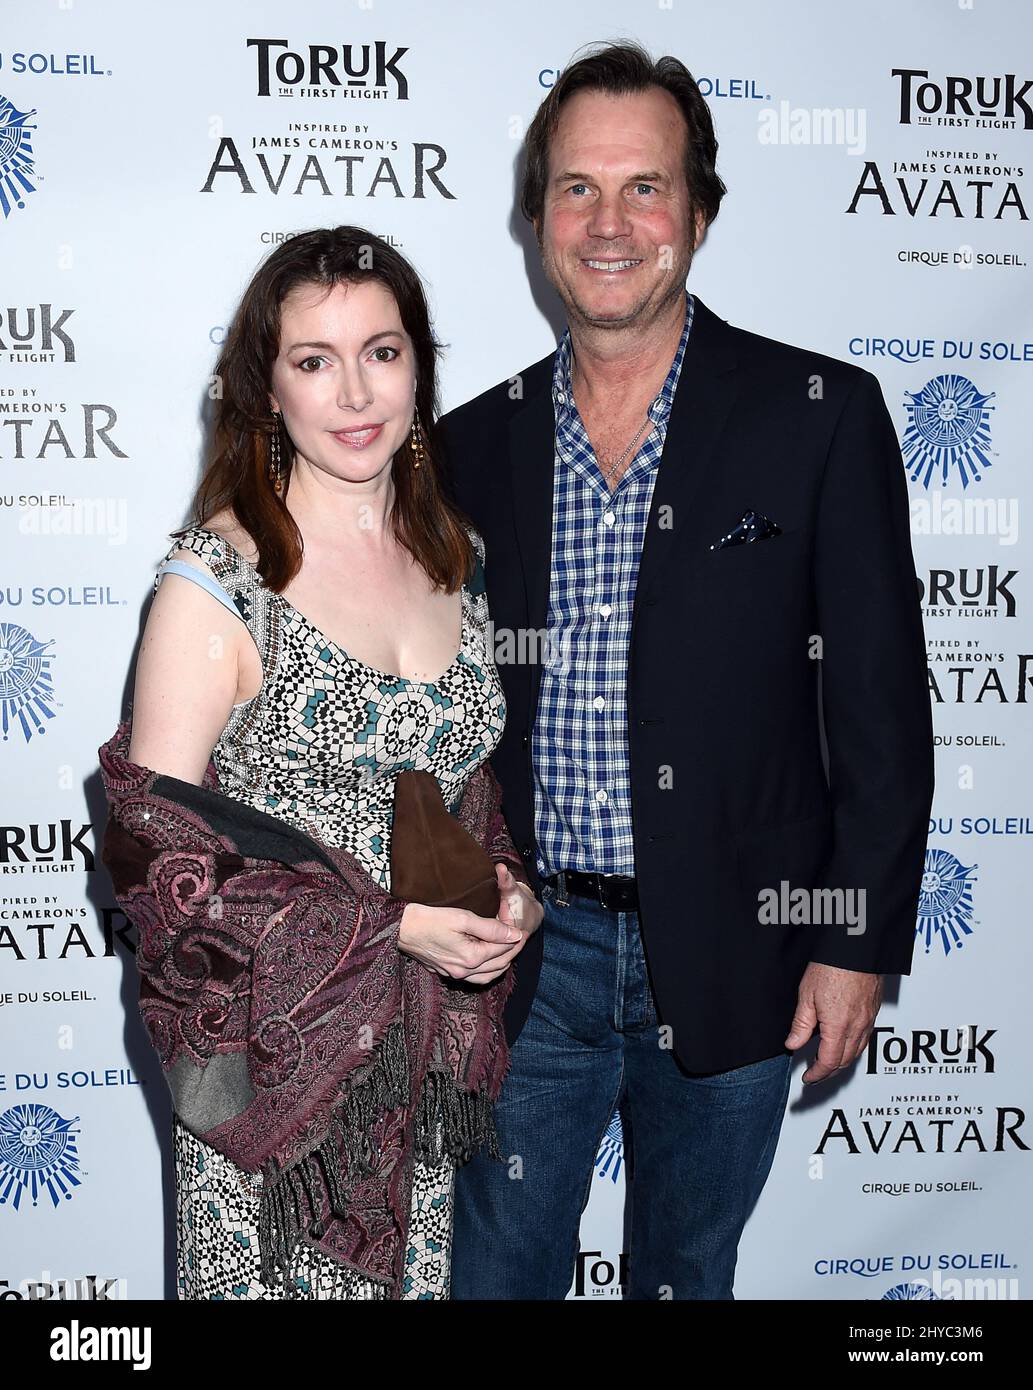 November 11, 2016 Los Angeles, CA Bill Paxton and Louise Newbury Opening of 'Toruck - The First Flight' the new Cirque du Soleil touring show inspired by James Cameron's Avatar held at Staples Center Stock Photo